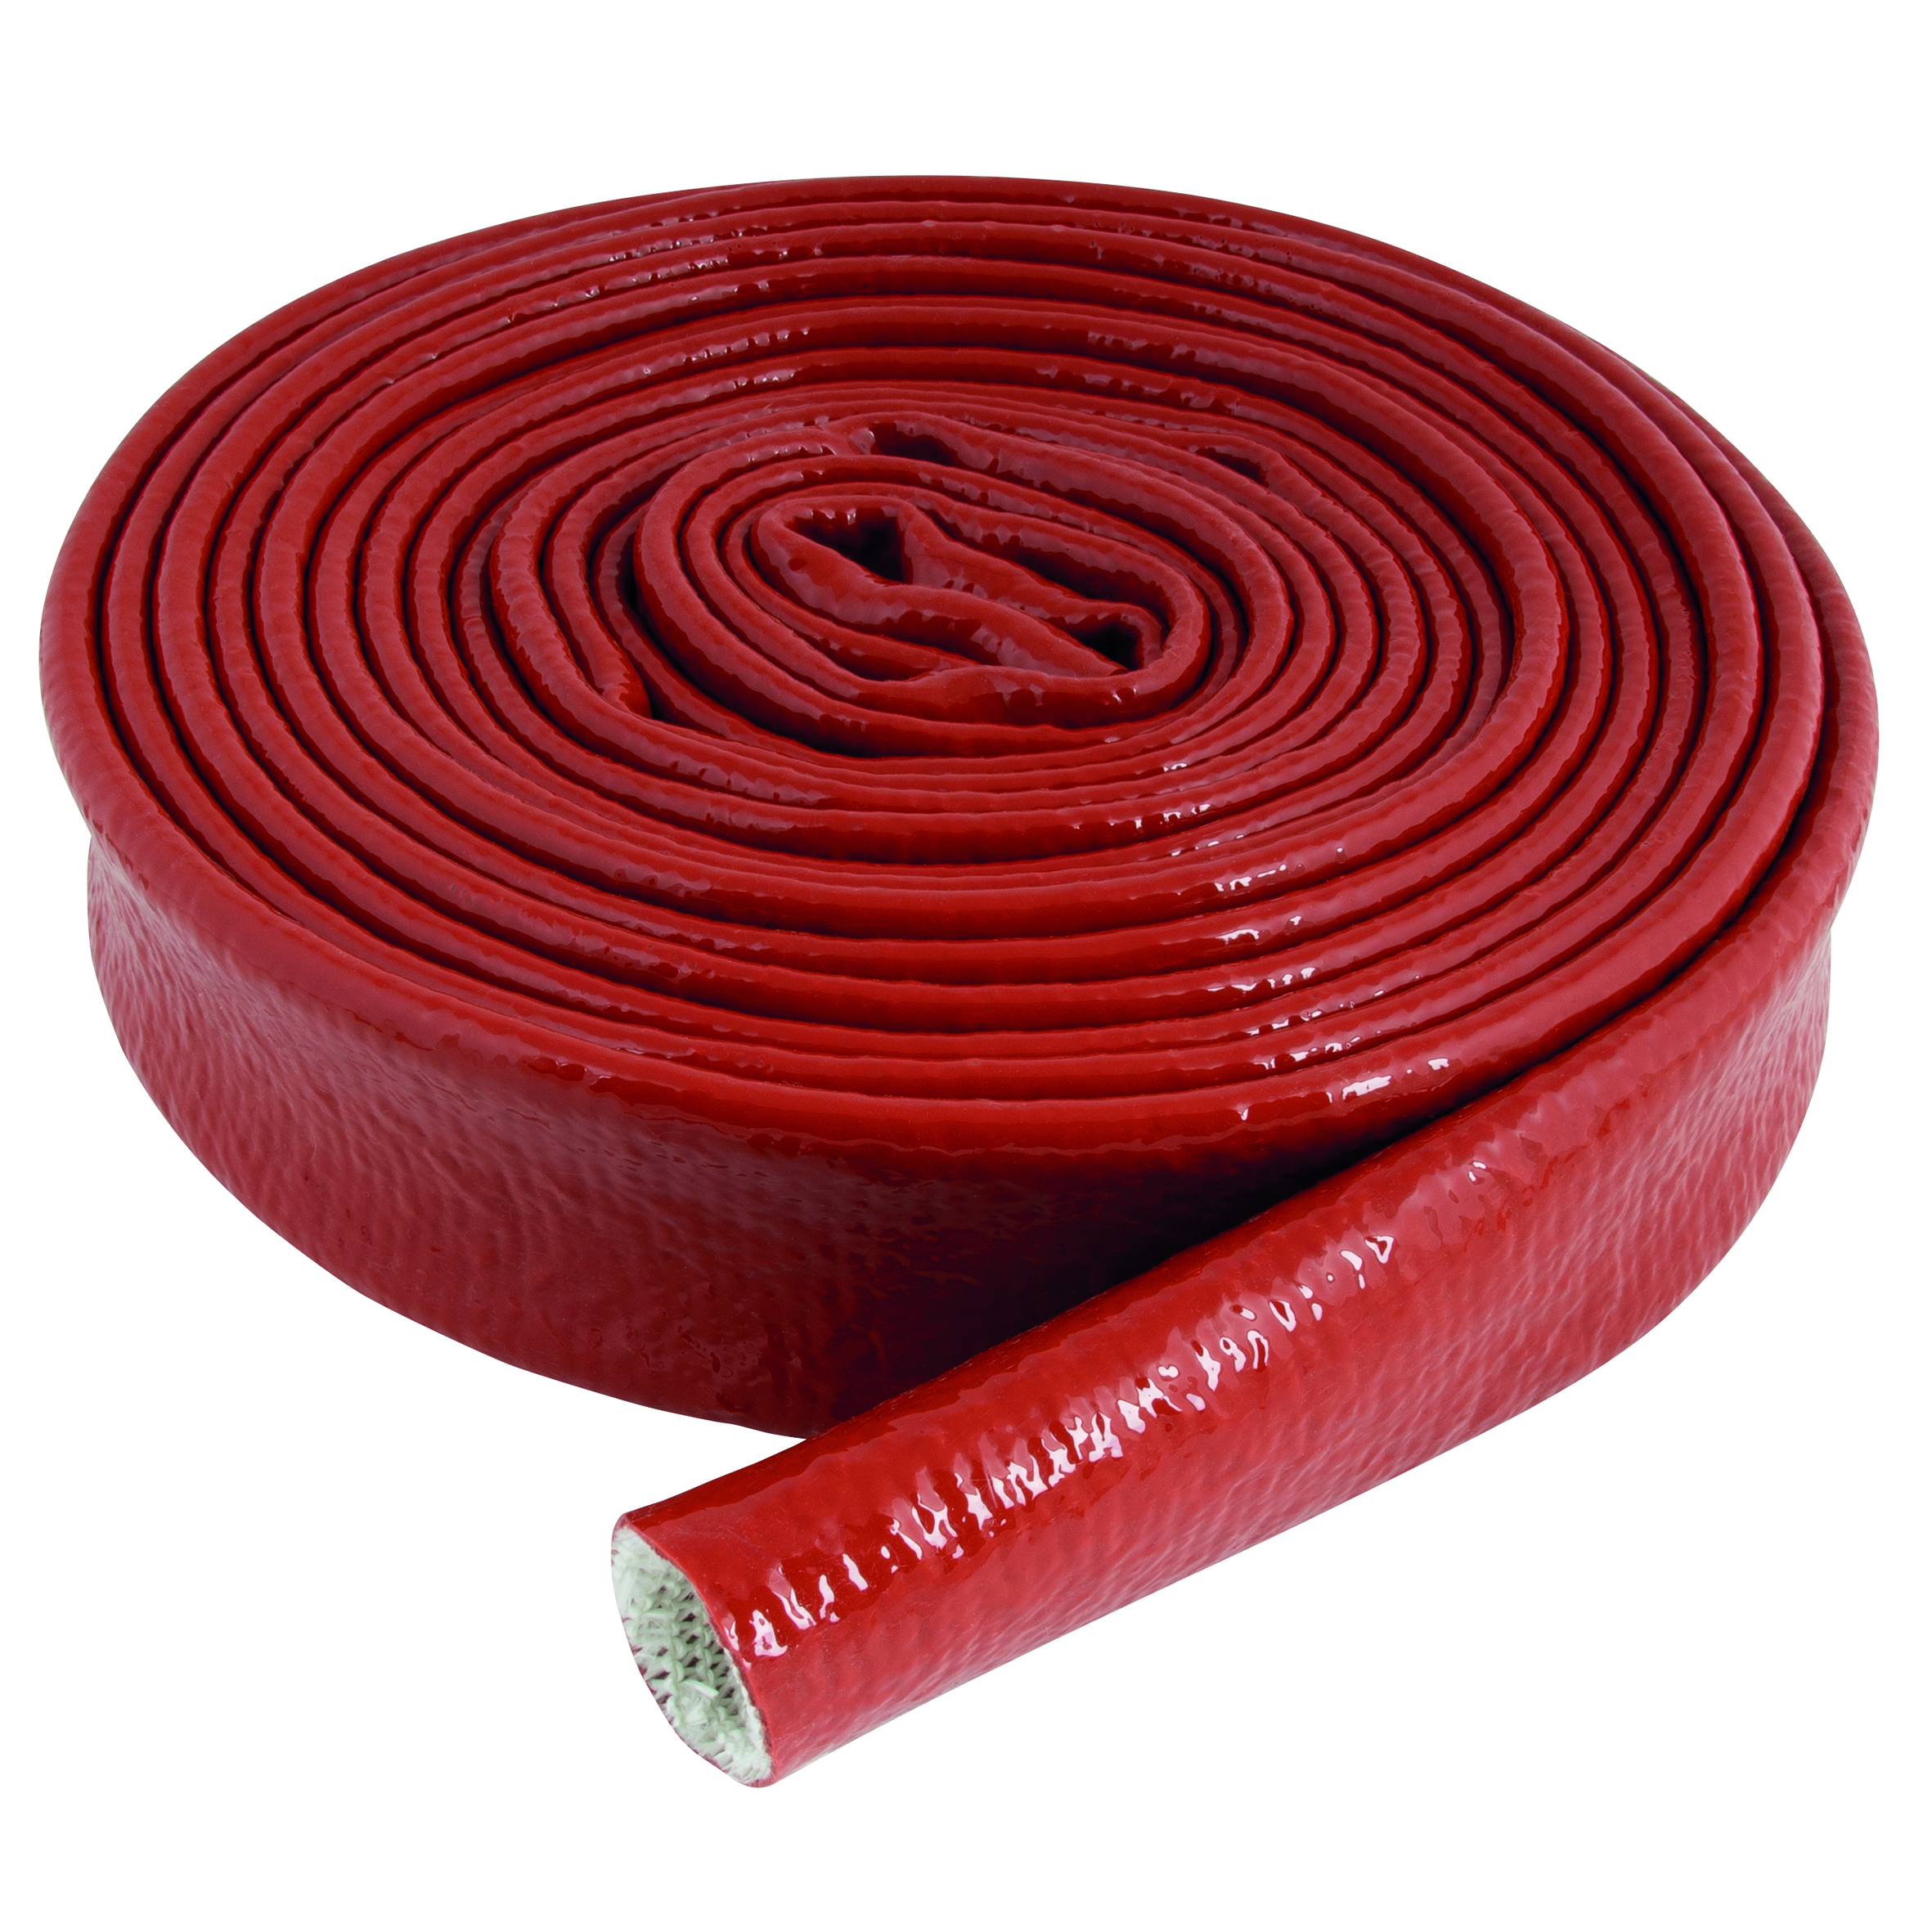 114MM ID RED COIL 15M FIRE SLEEVE